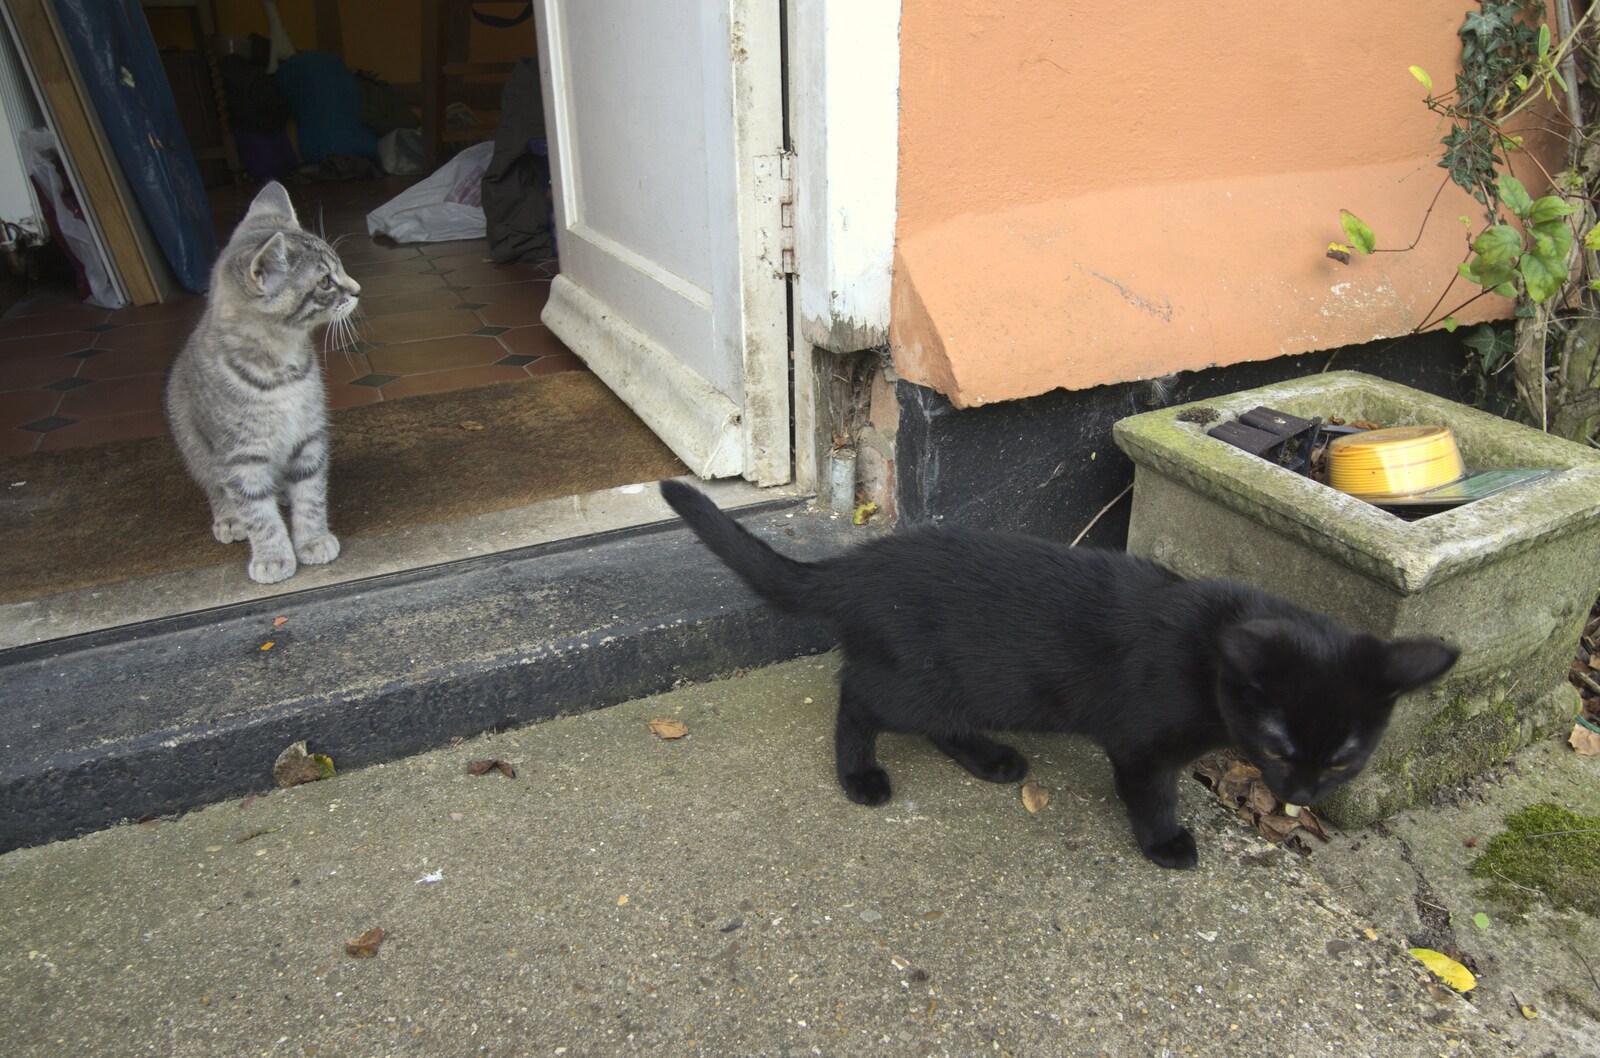 The kittens get let out for the first time from Sis and Matt Visit, and the Kittens Are Let Out, Brome, Suffolk - 21st August 2009